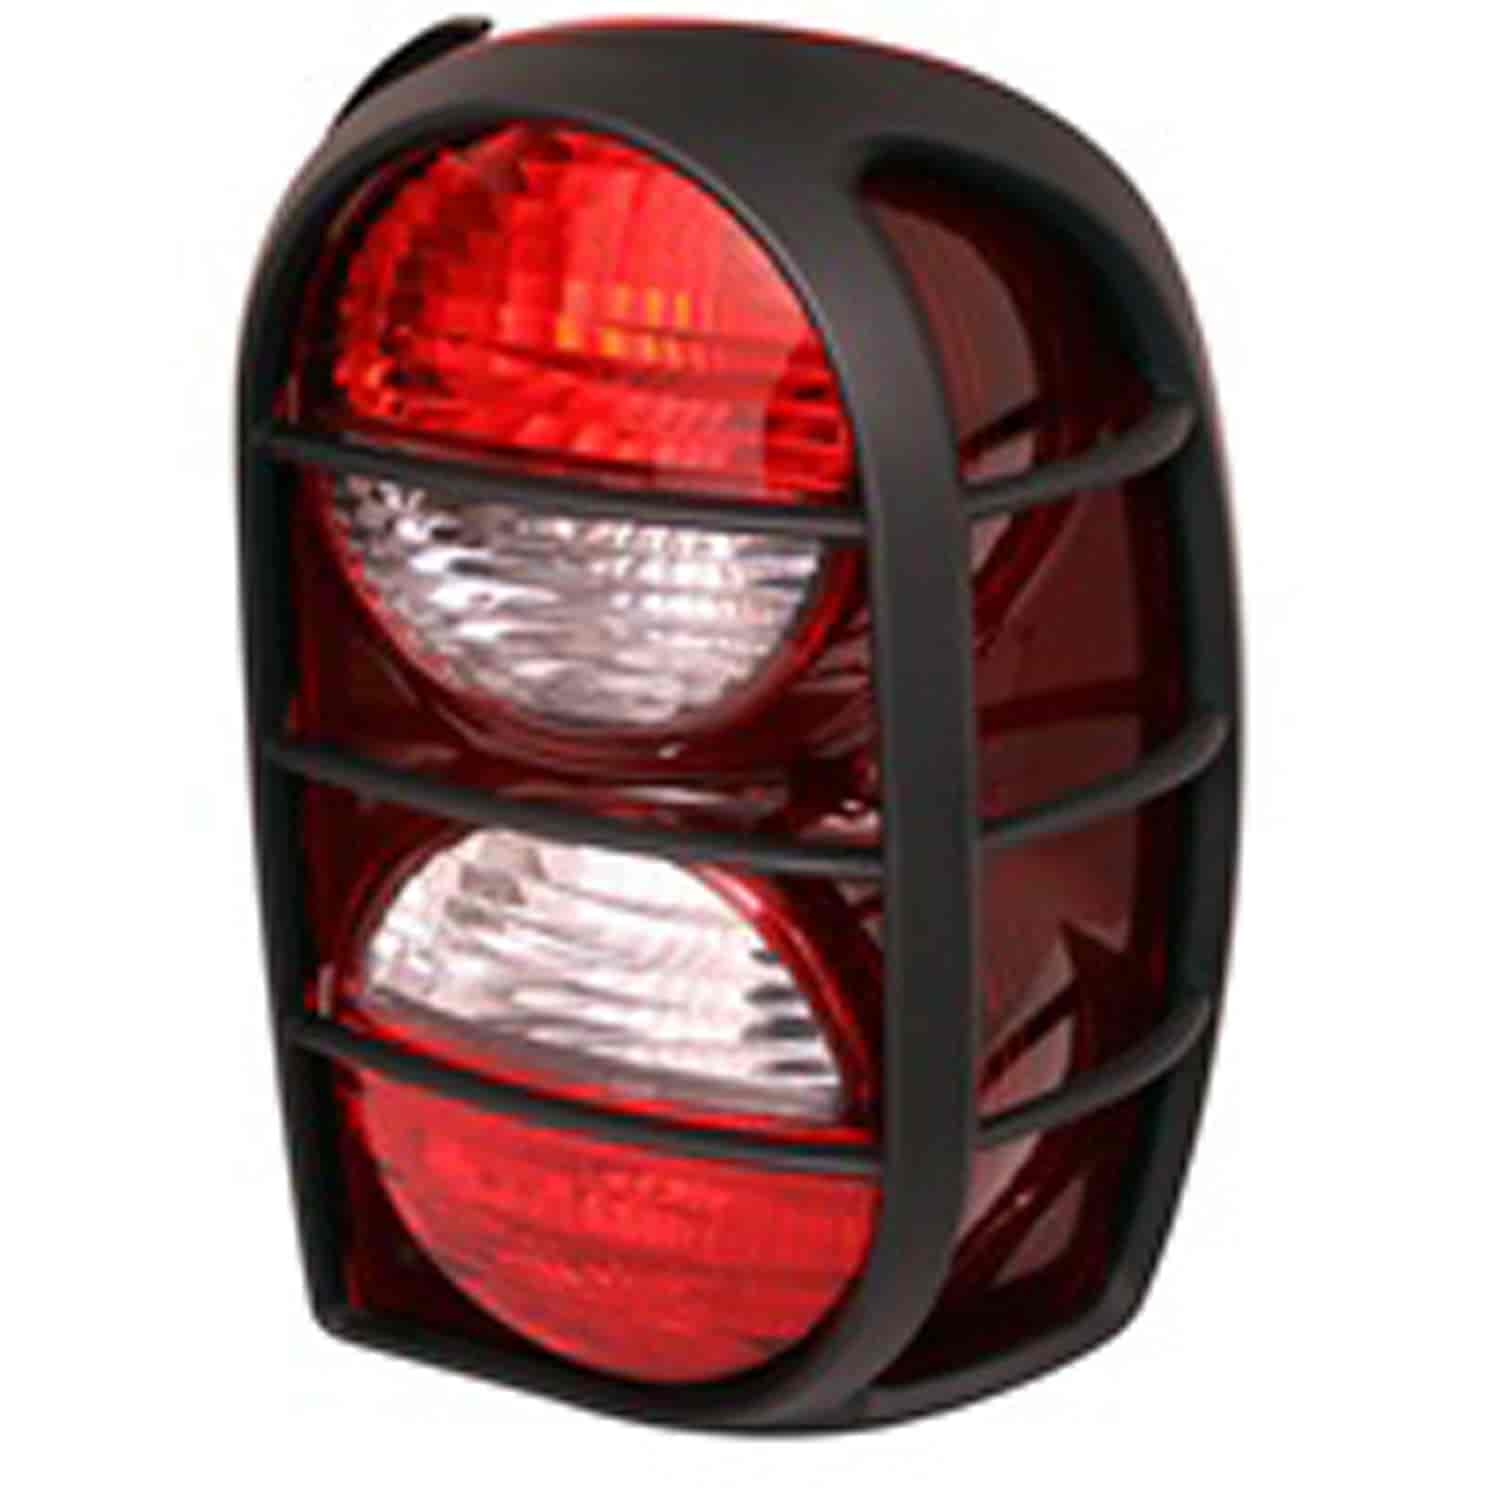 Replacement tail light assembly from Omix-ADA, Fits right side of 05-07 Jeep Liberty KJ with an air dam.